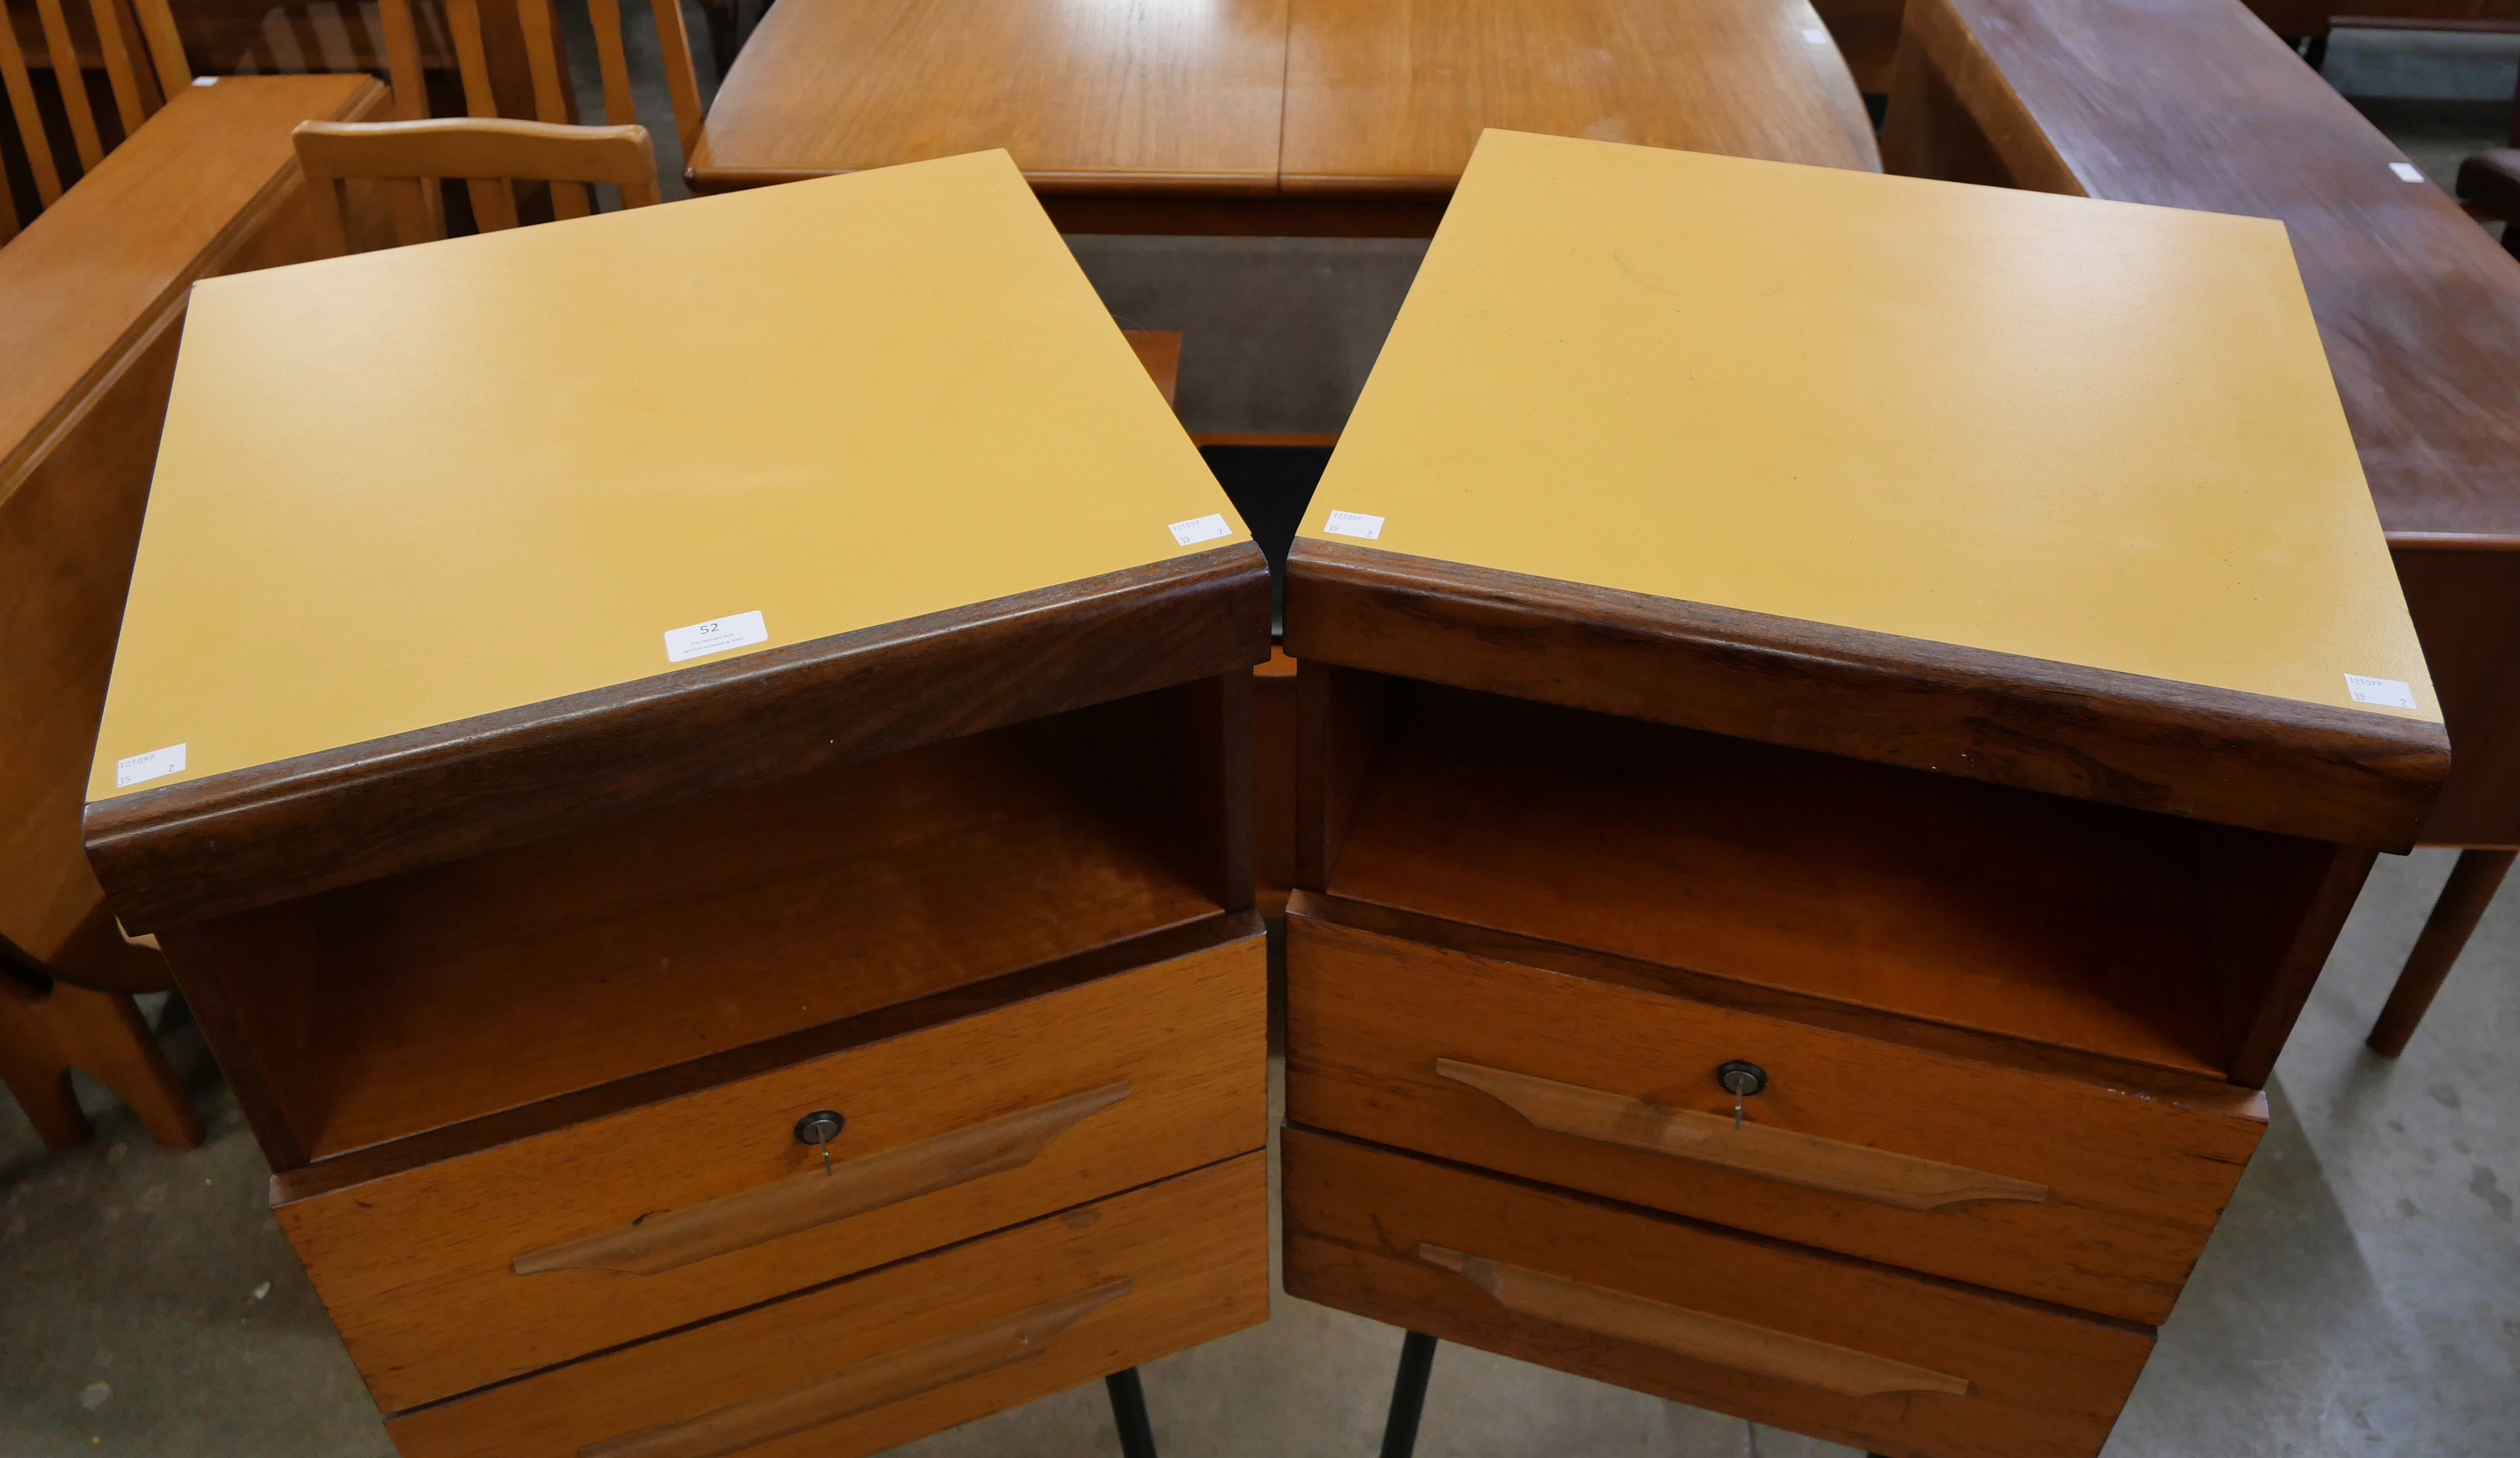 A pair of teak cabinets and black tubulor metal stands - Image 2 of 2